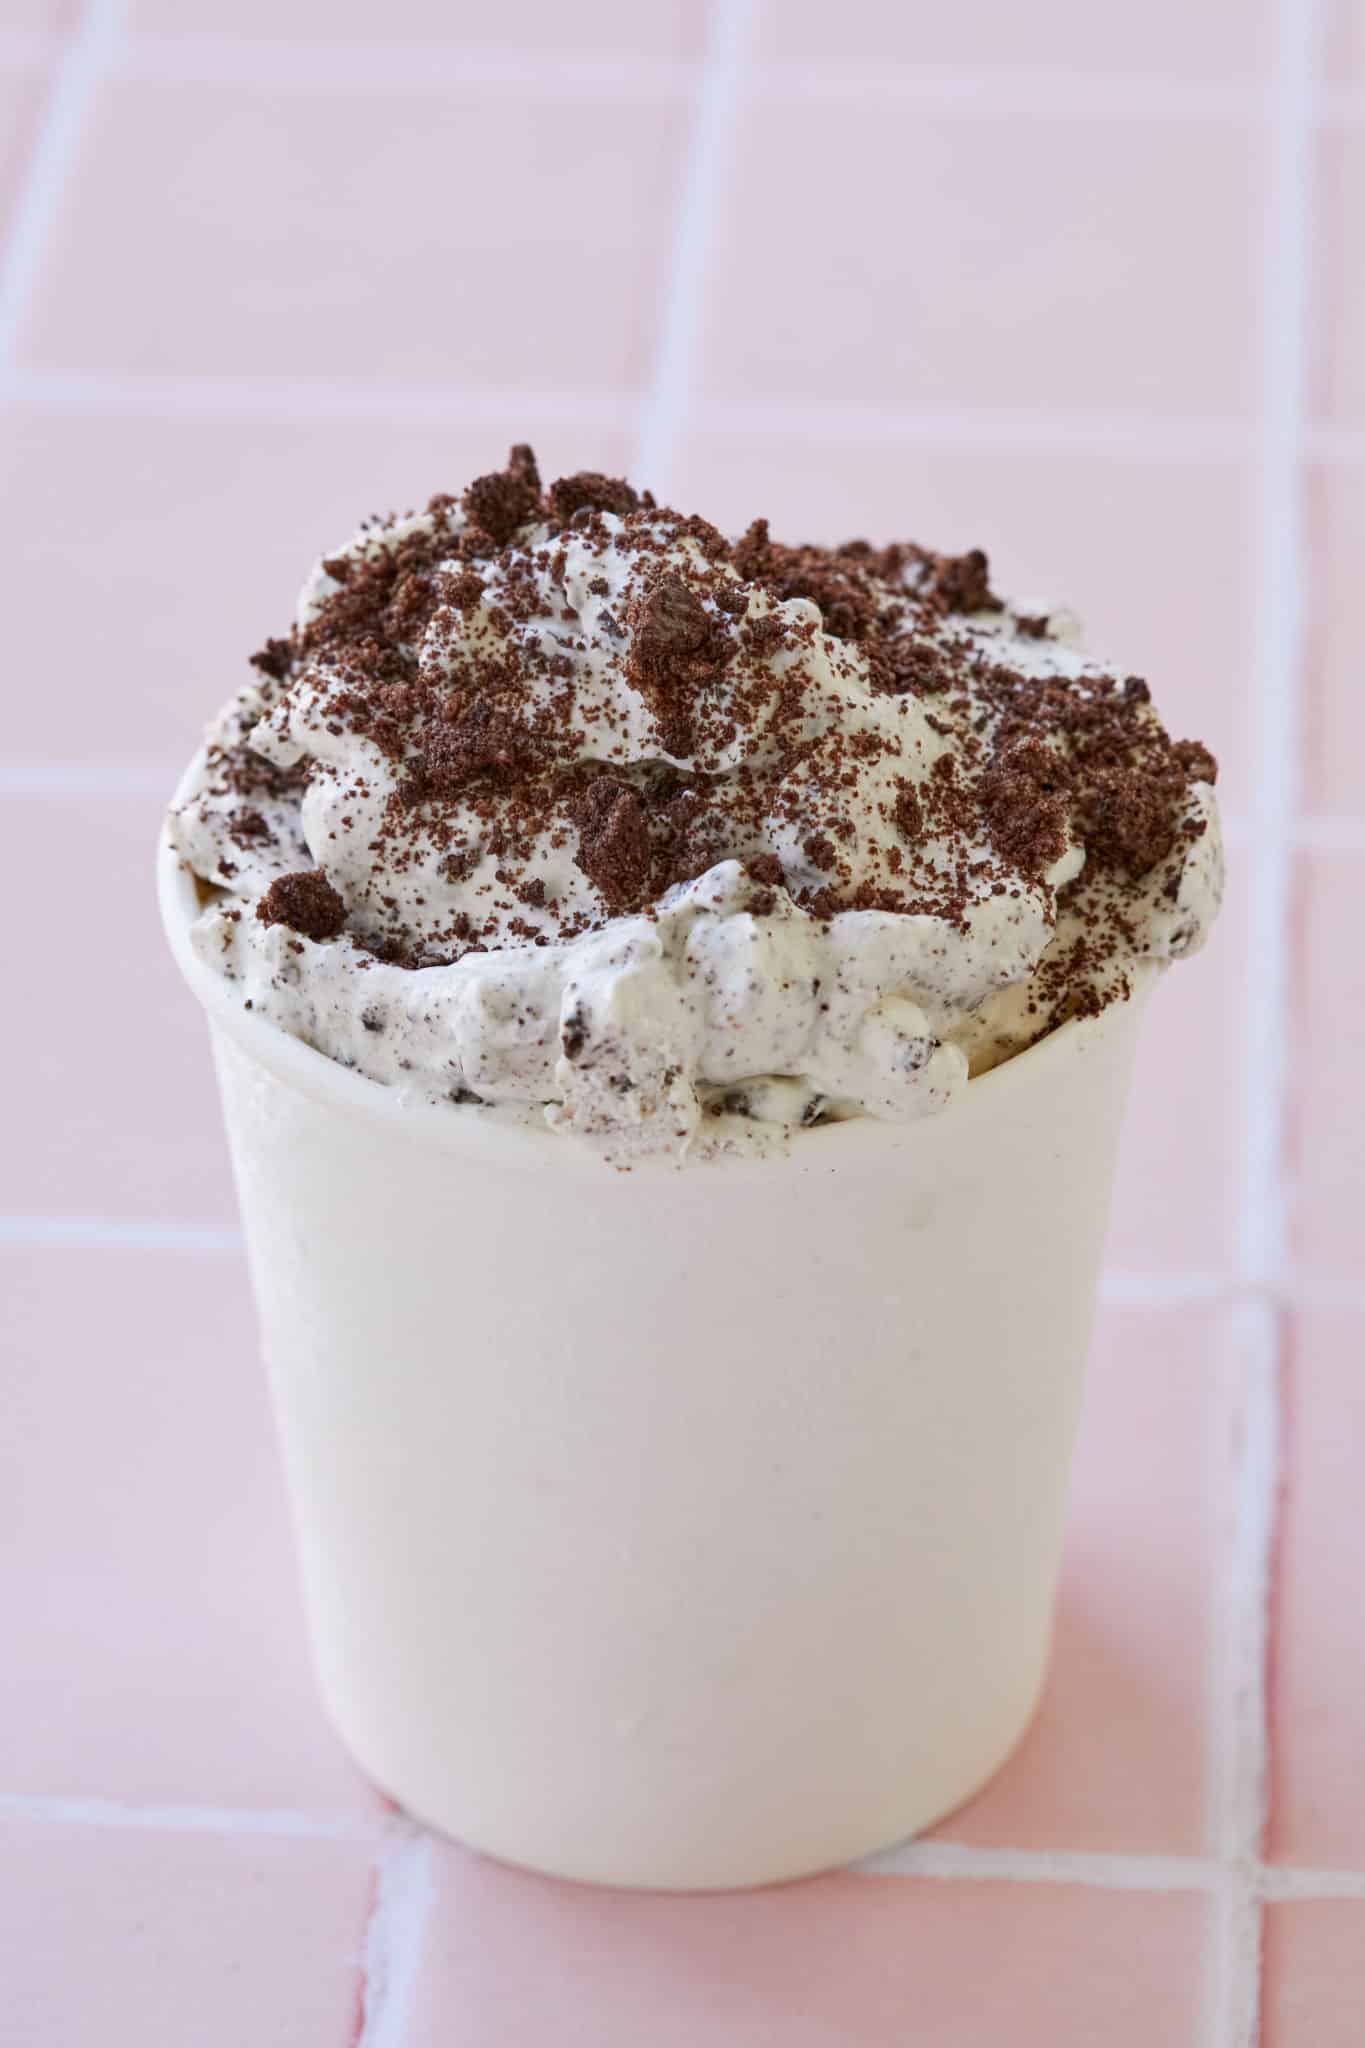 A tub of cookies and cream ice cream